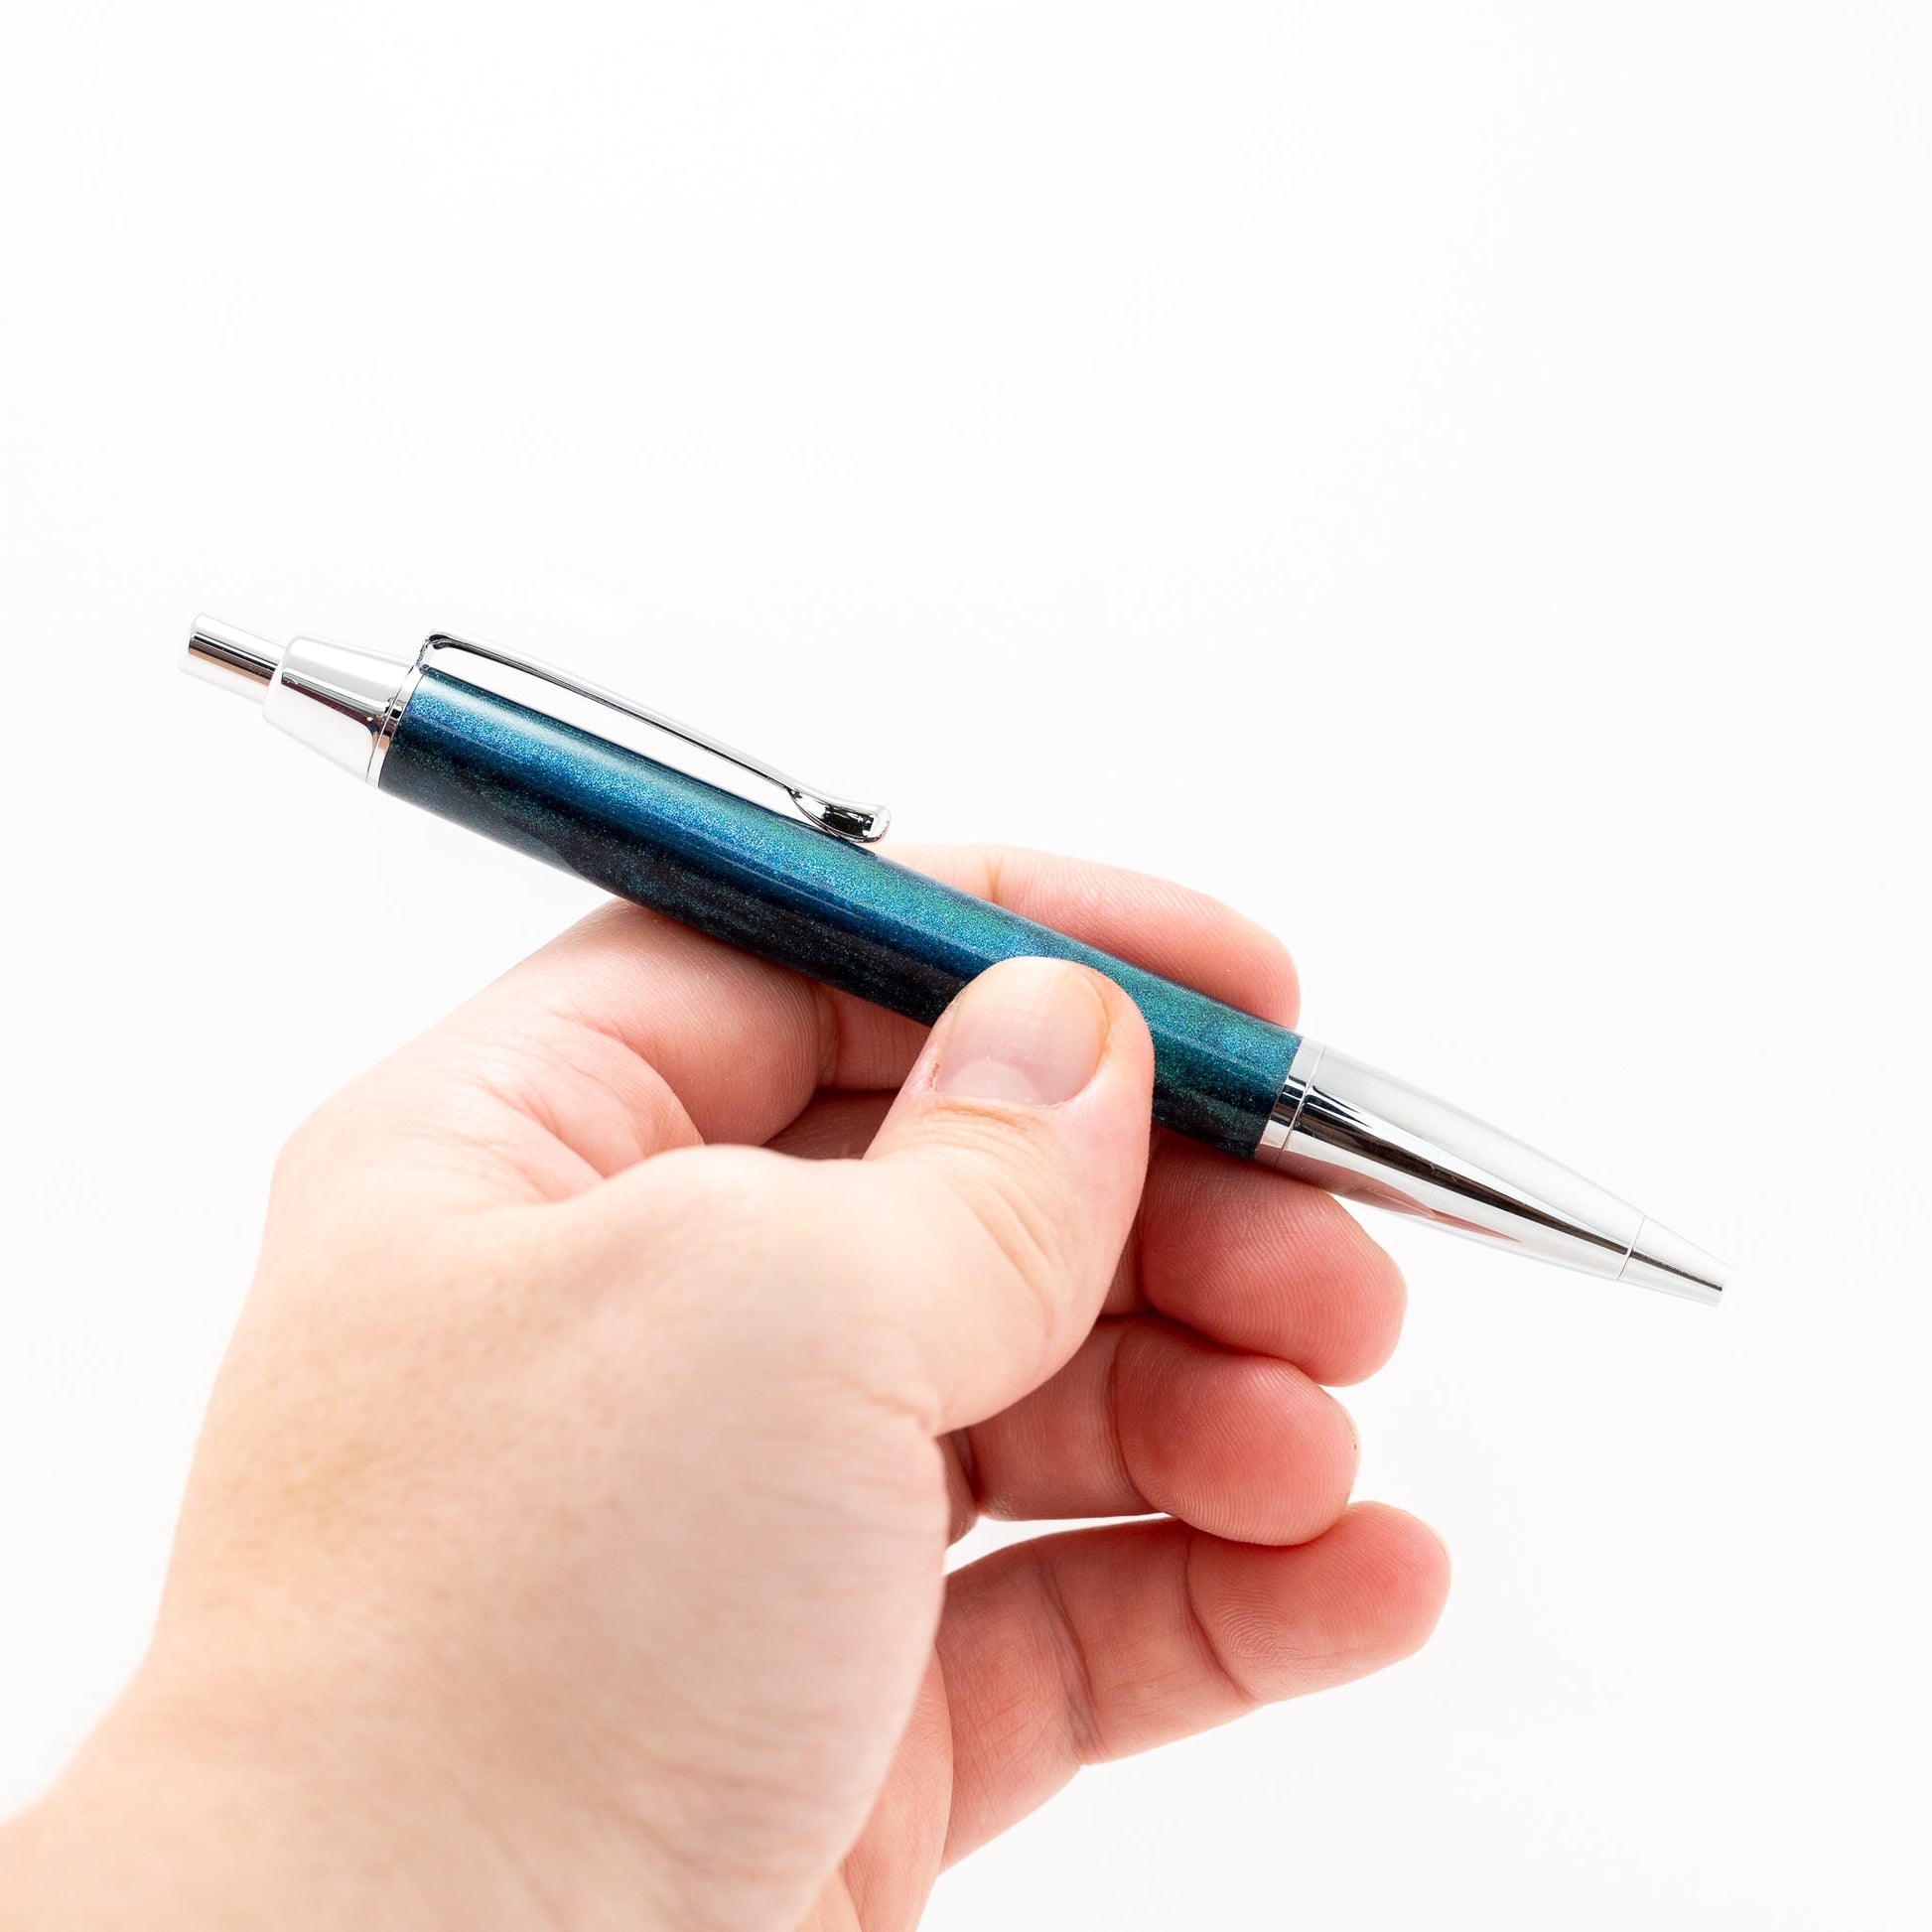 Handmade blue color shift to turquoise resin click pen in chrome plating